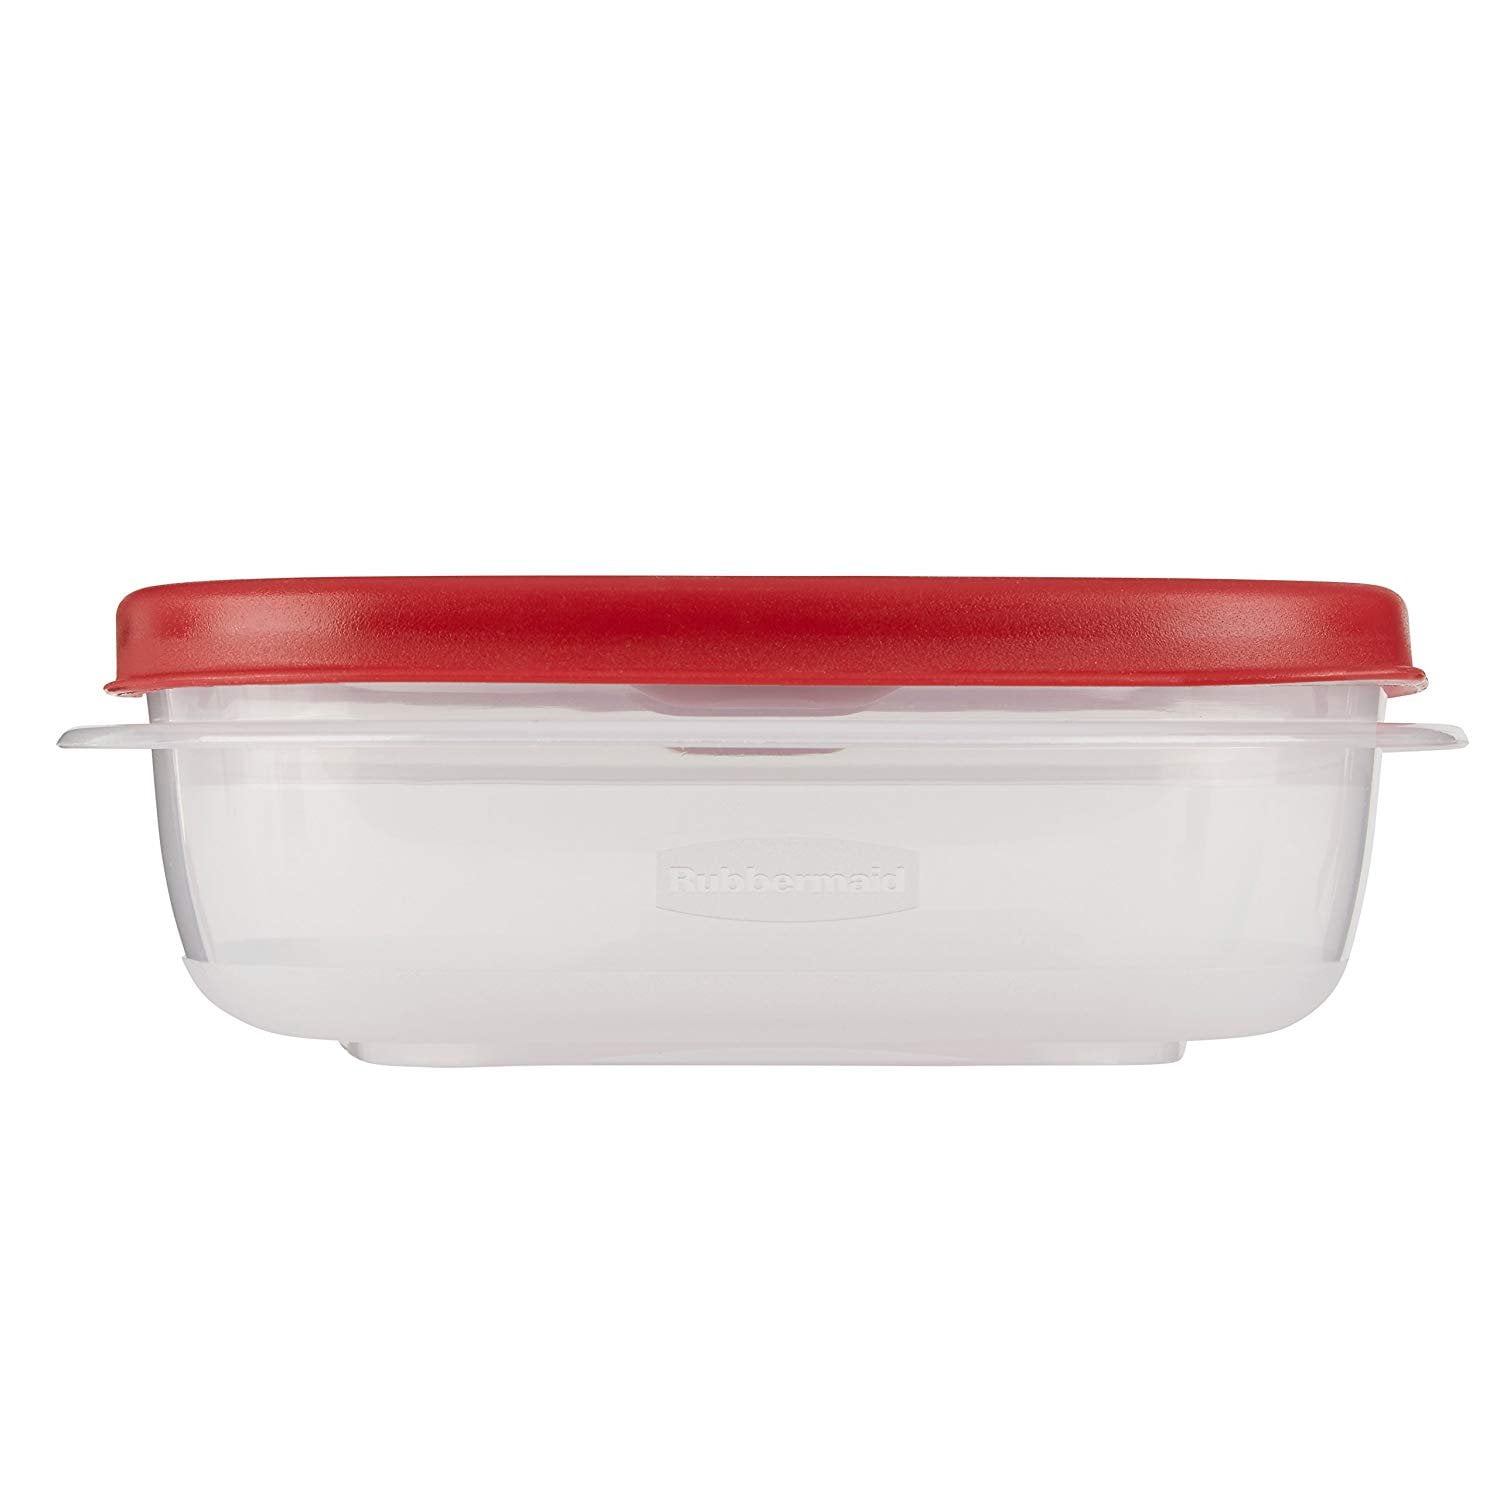 Rubbermaid® EasyFindLids® Vented Food Container - Clear/Racer Red, 56 oz -  Ralphs